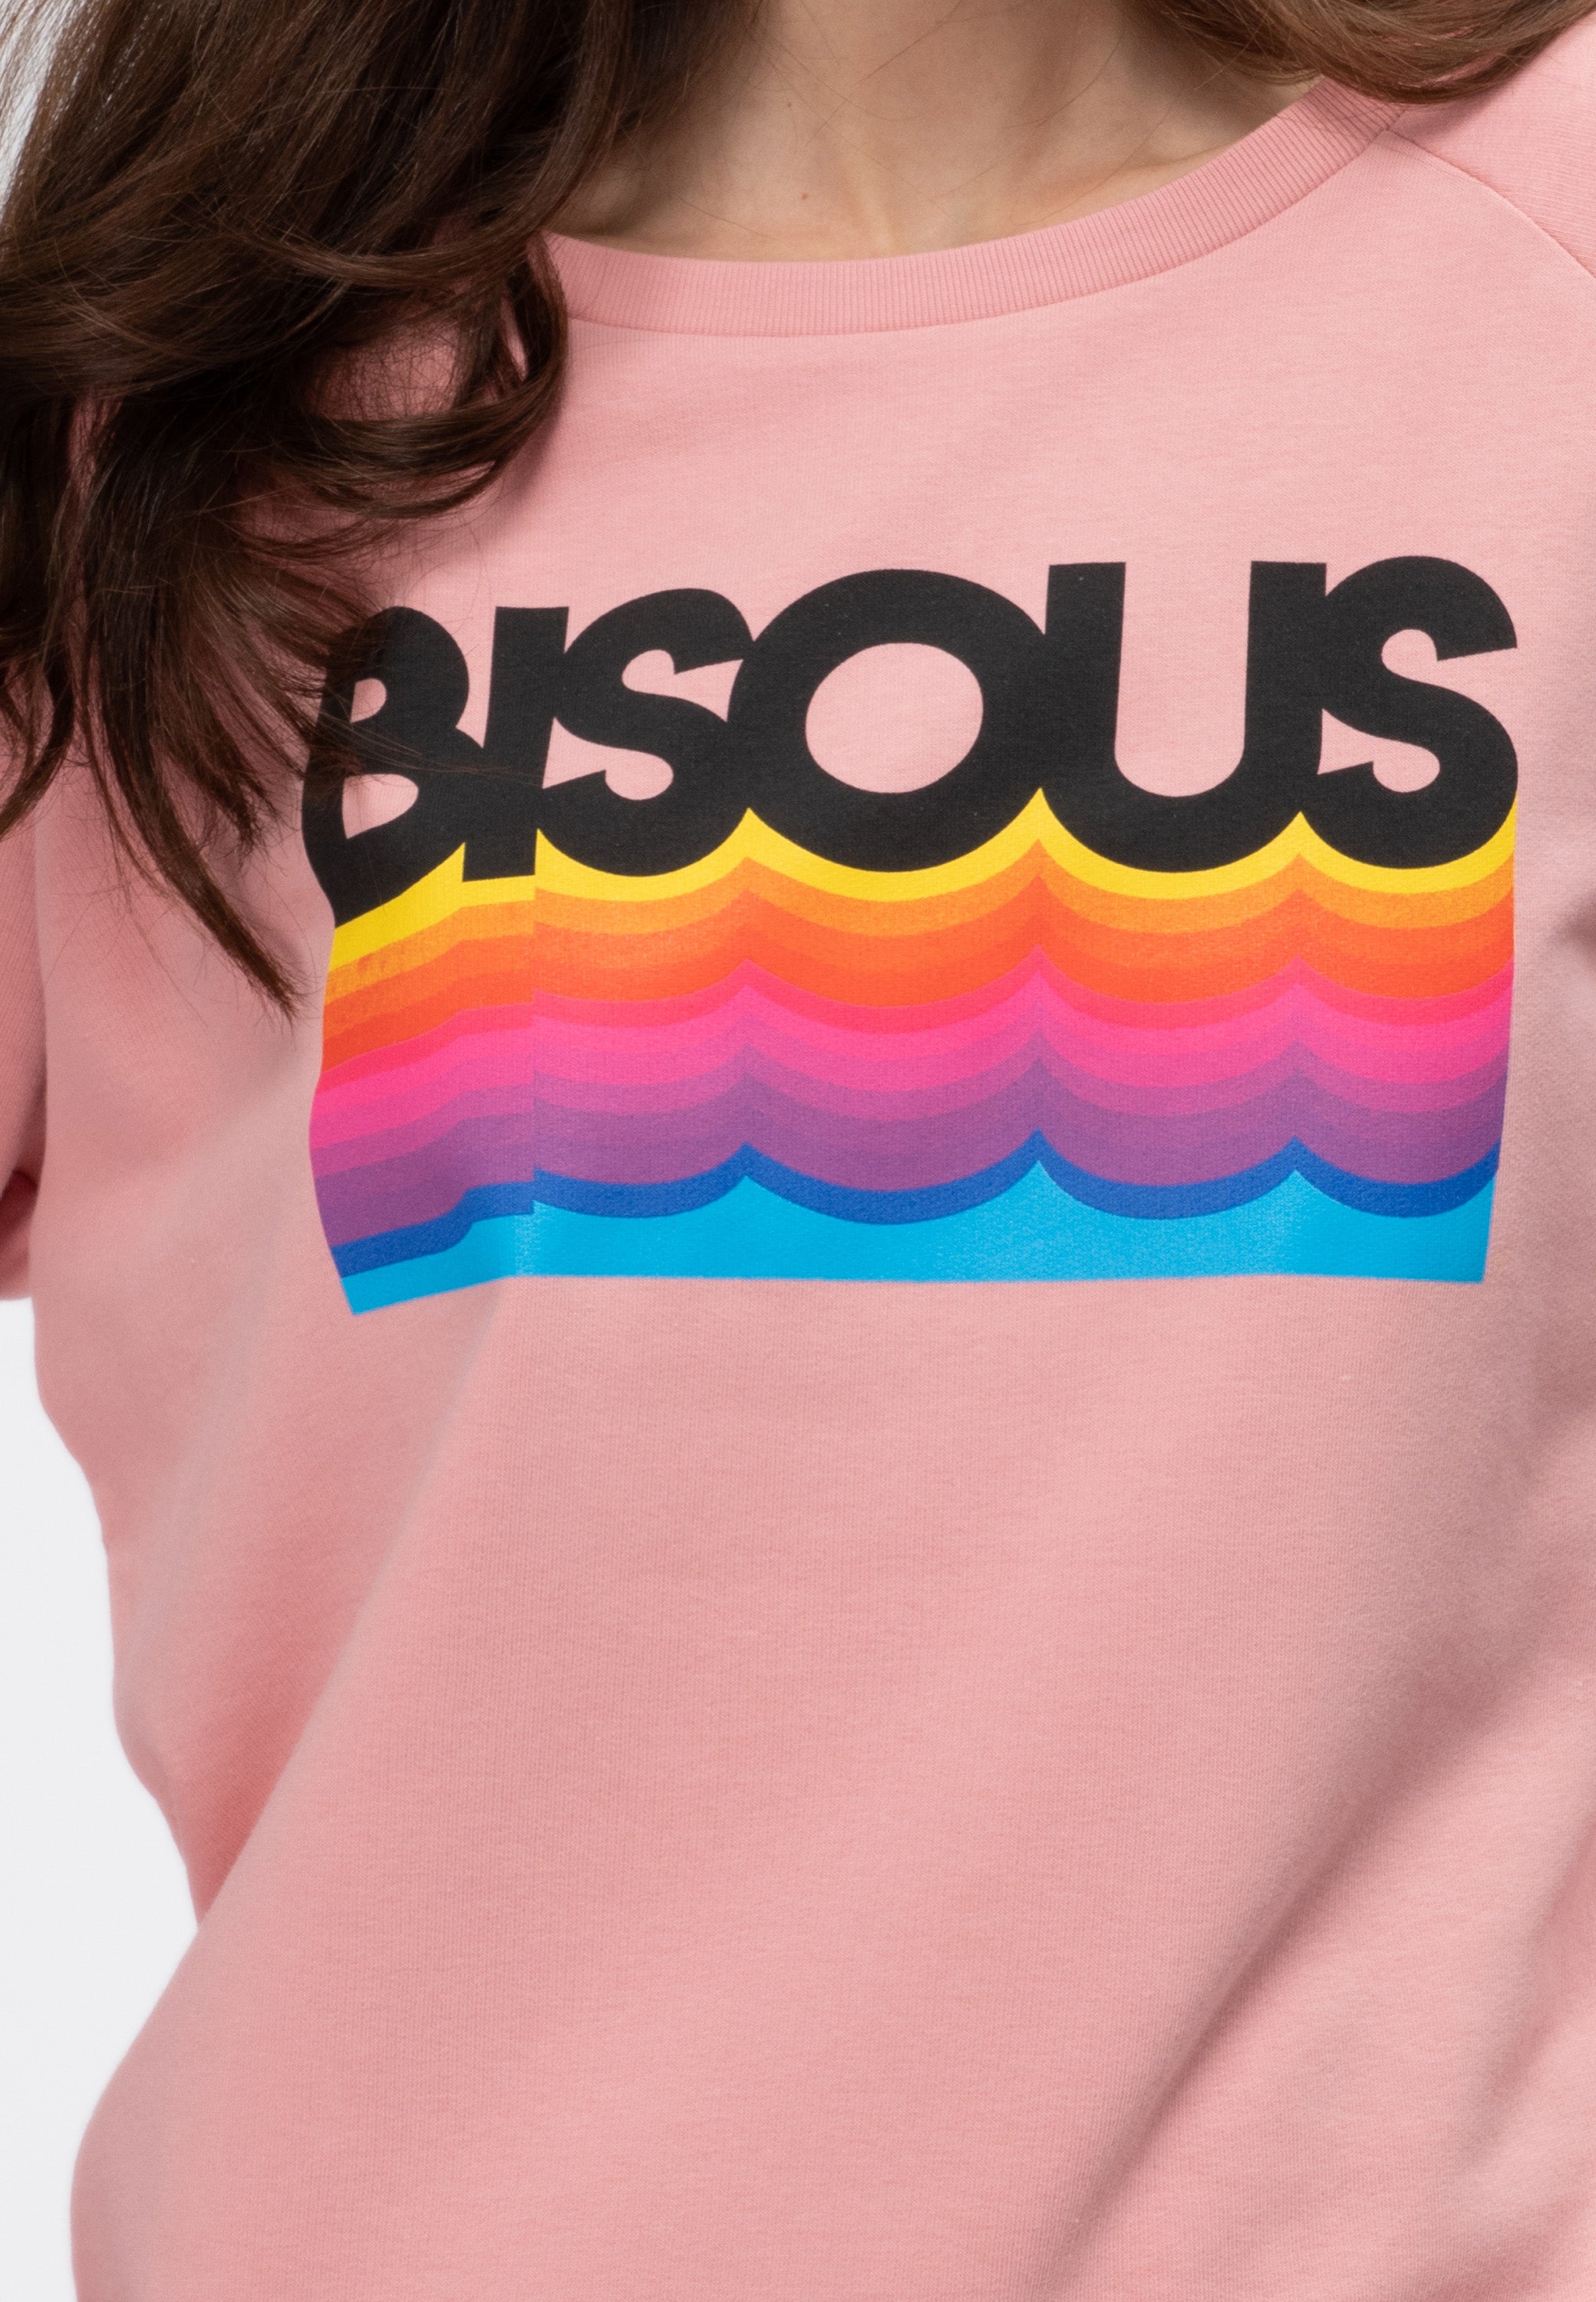 Bisous Sweater - Rose